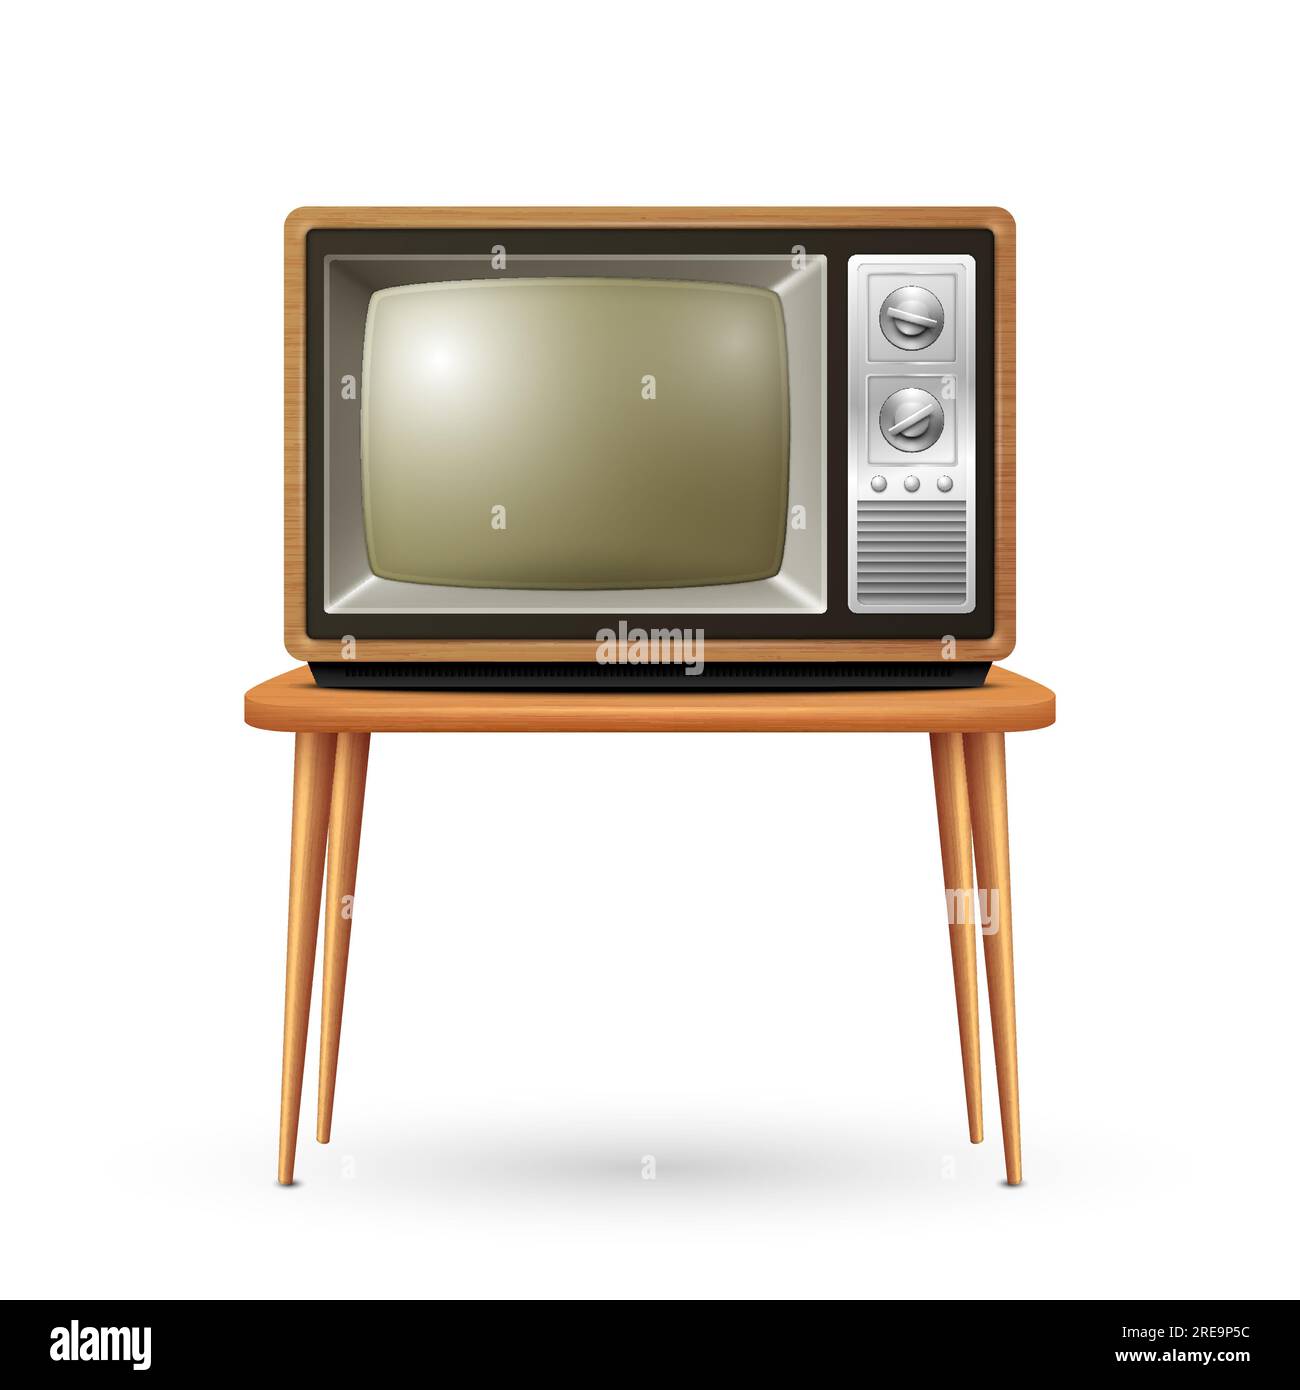 Vector 3d Realistic Retro TV Receiver Isolated on White Background. Home Interior Design Concept. Vintage TV Set, Television, Front View Stock Vector